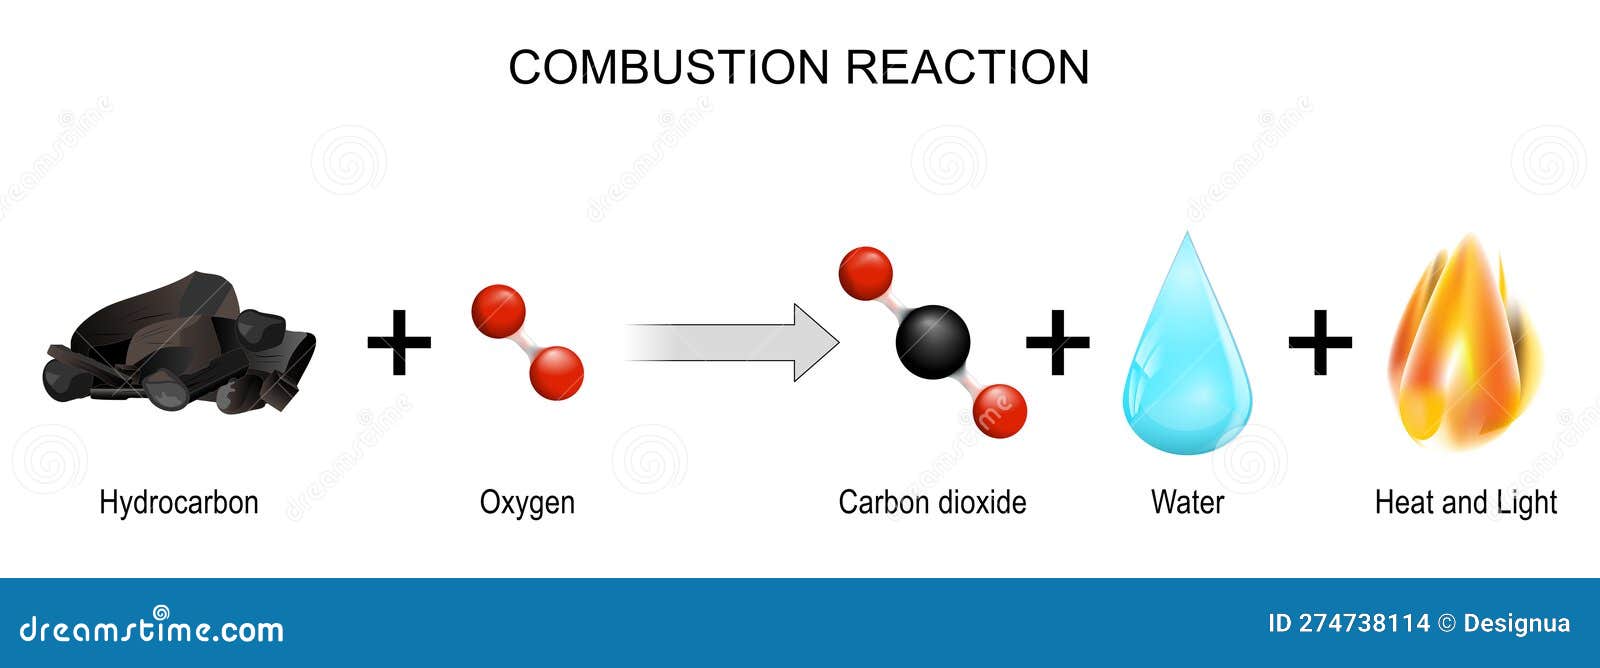 combustion reaction